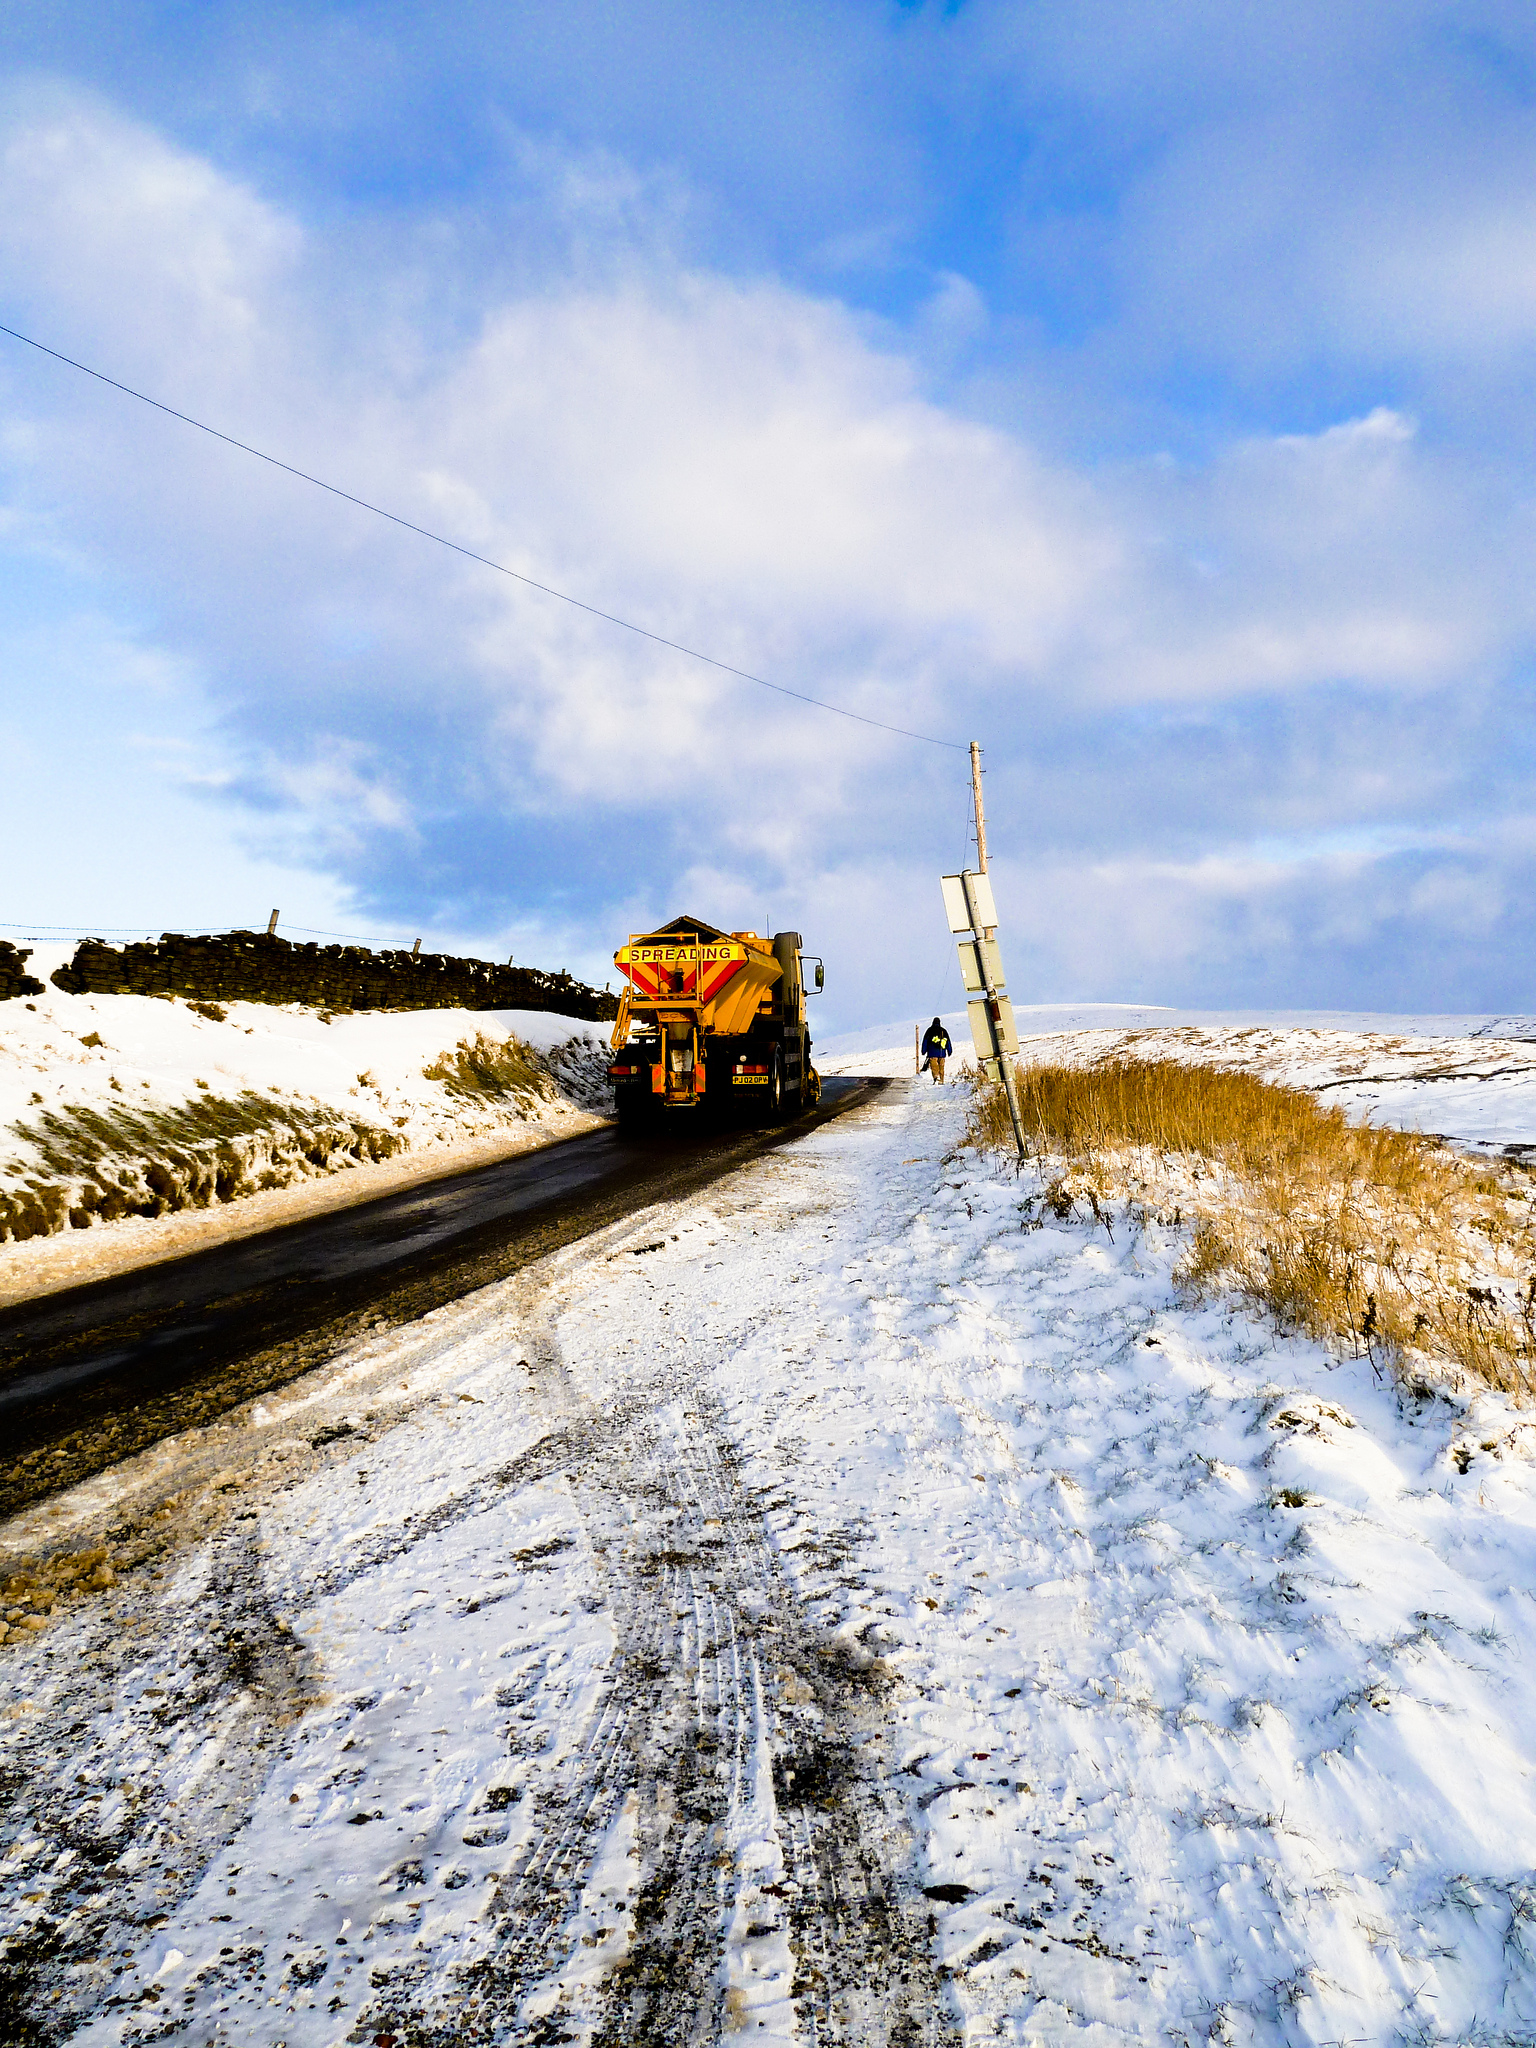 A photo of gritting on Pendle's wintry roads